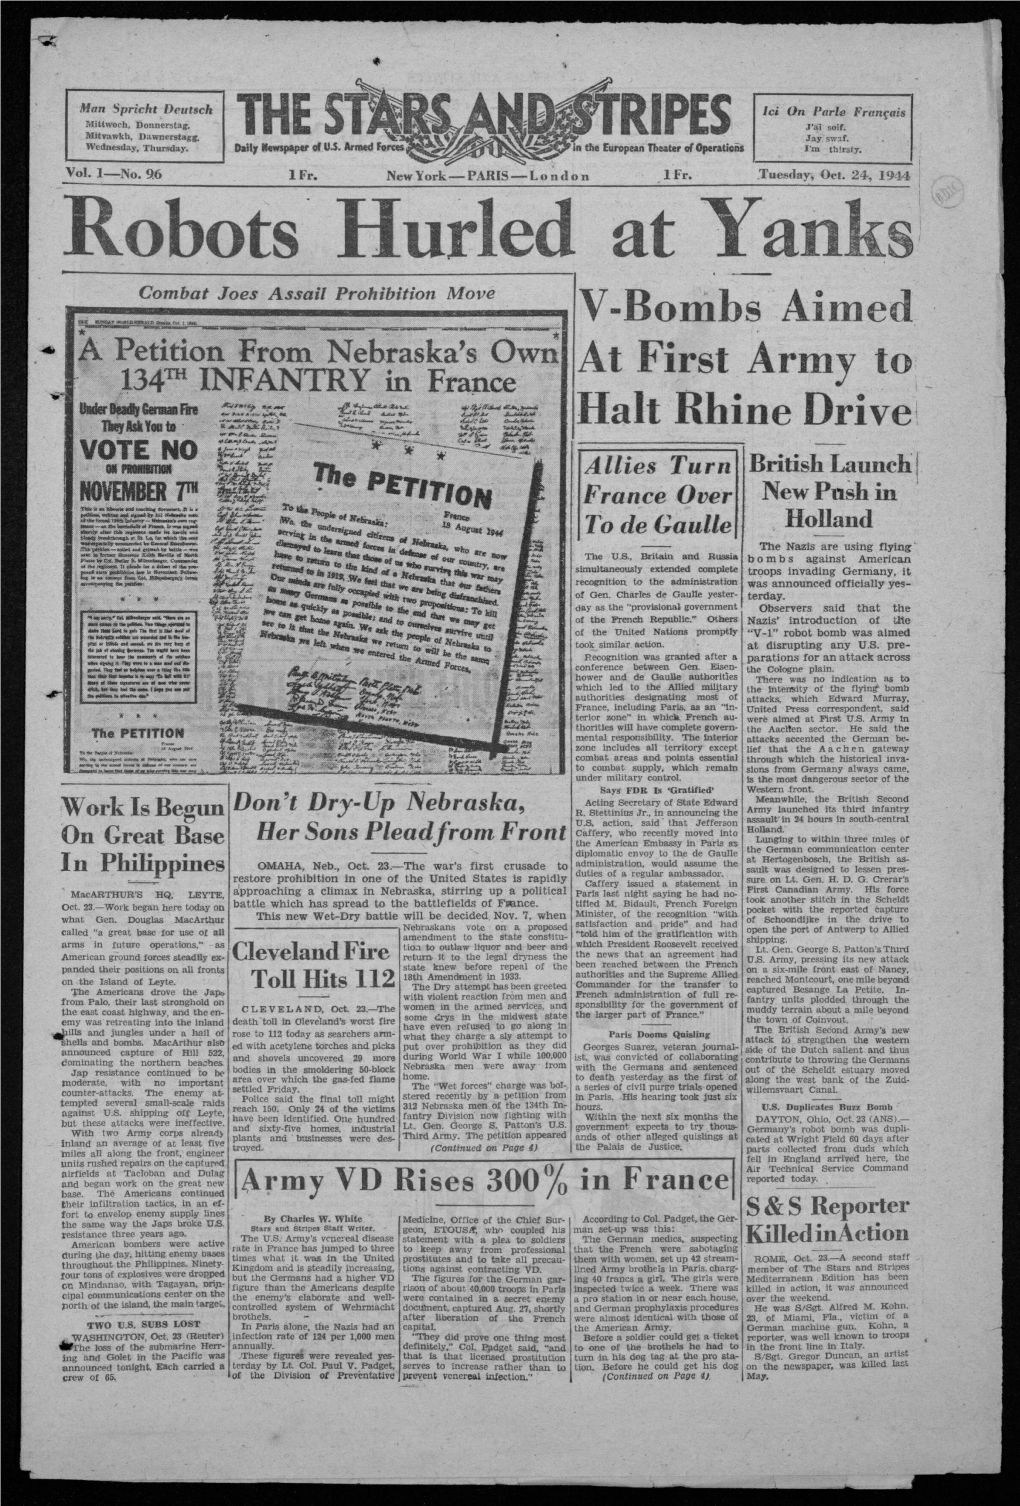 V-Bombs Aimed at First Army to Halt Rhine Drive